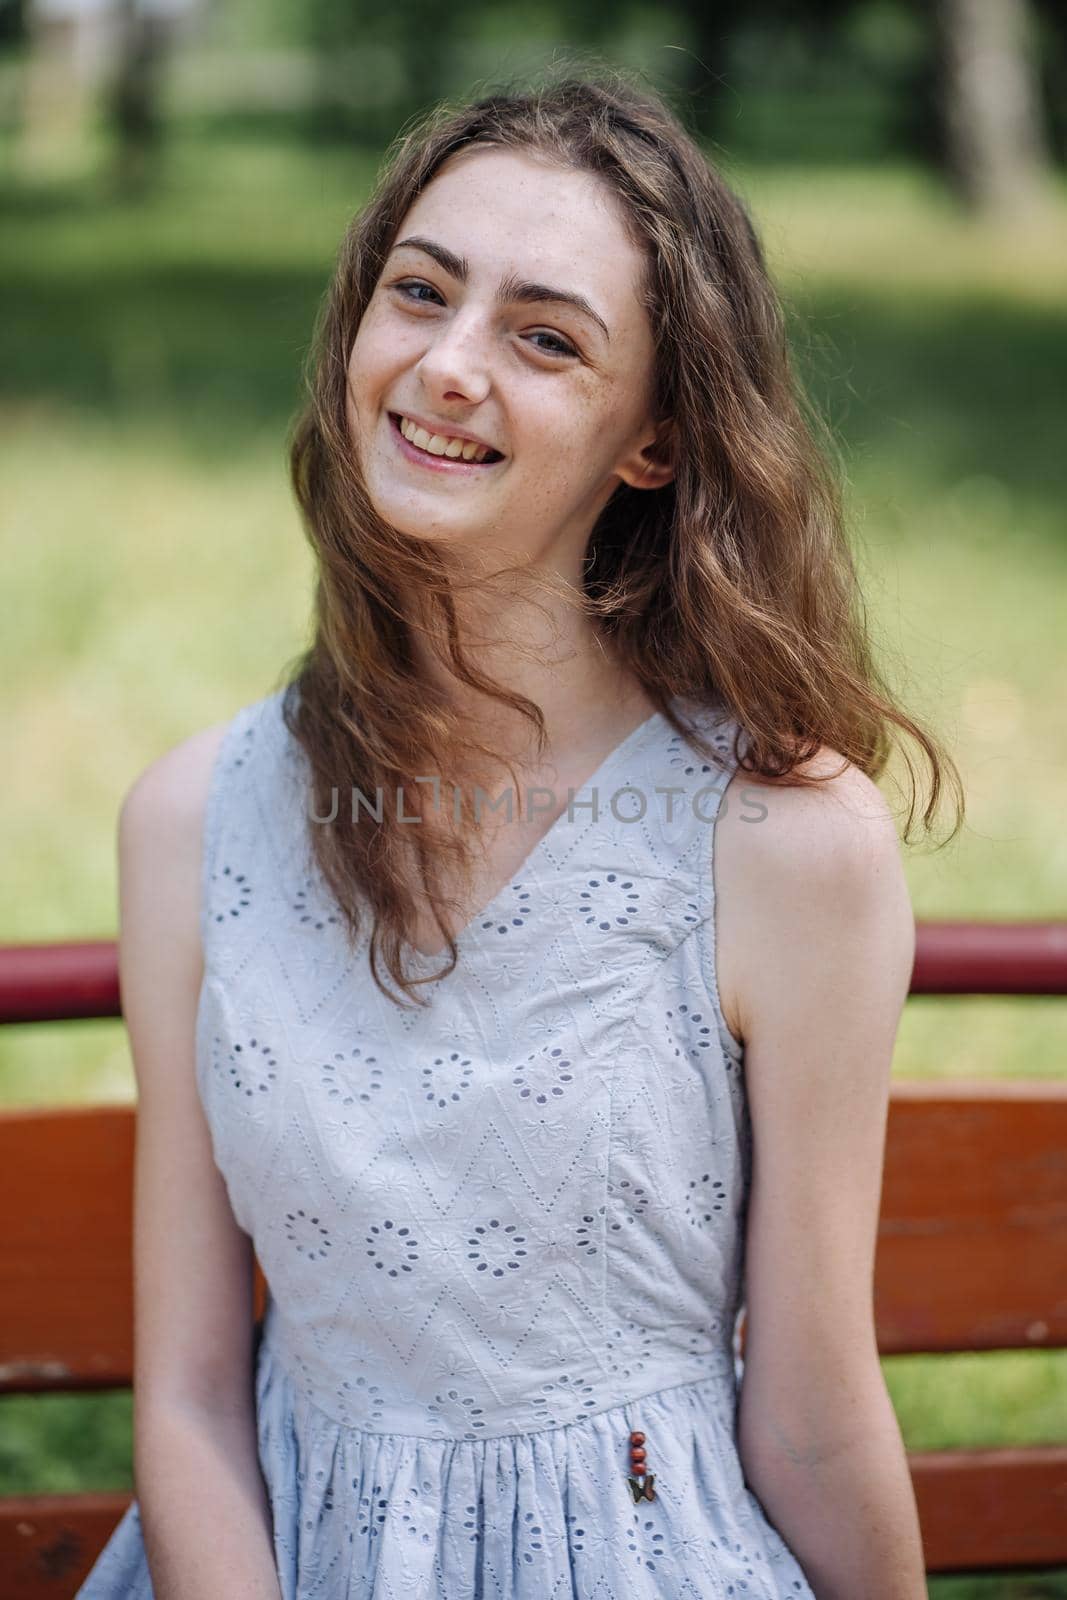 Portrait of a young smiling girl on a park bench. by DovidPro